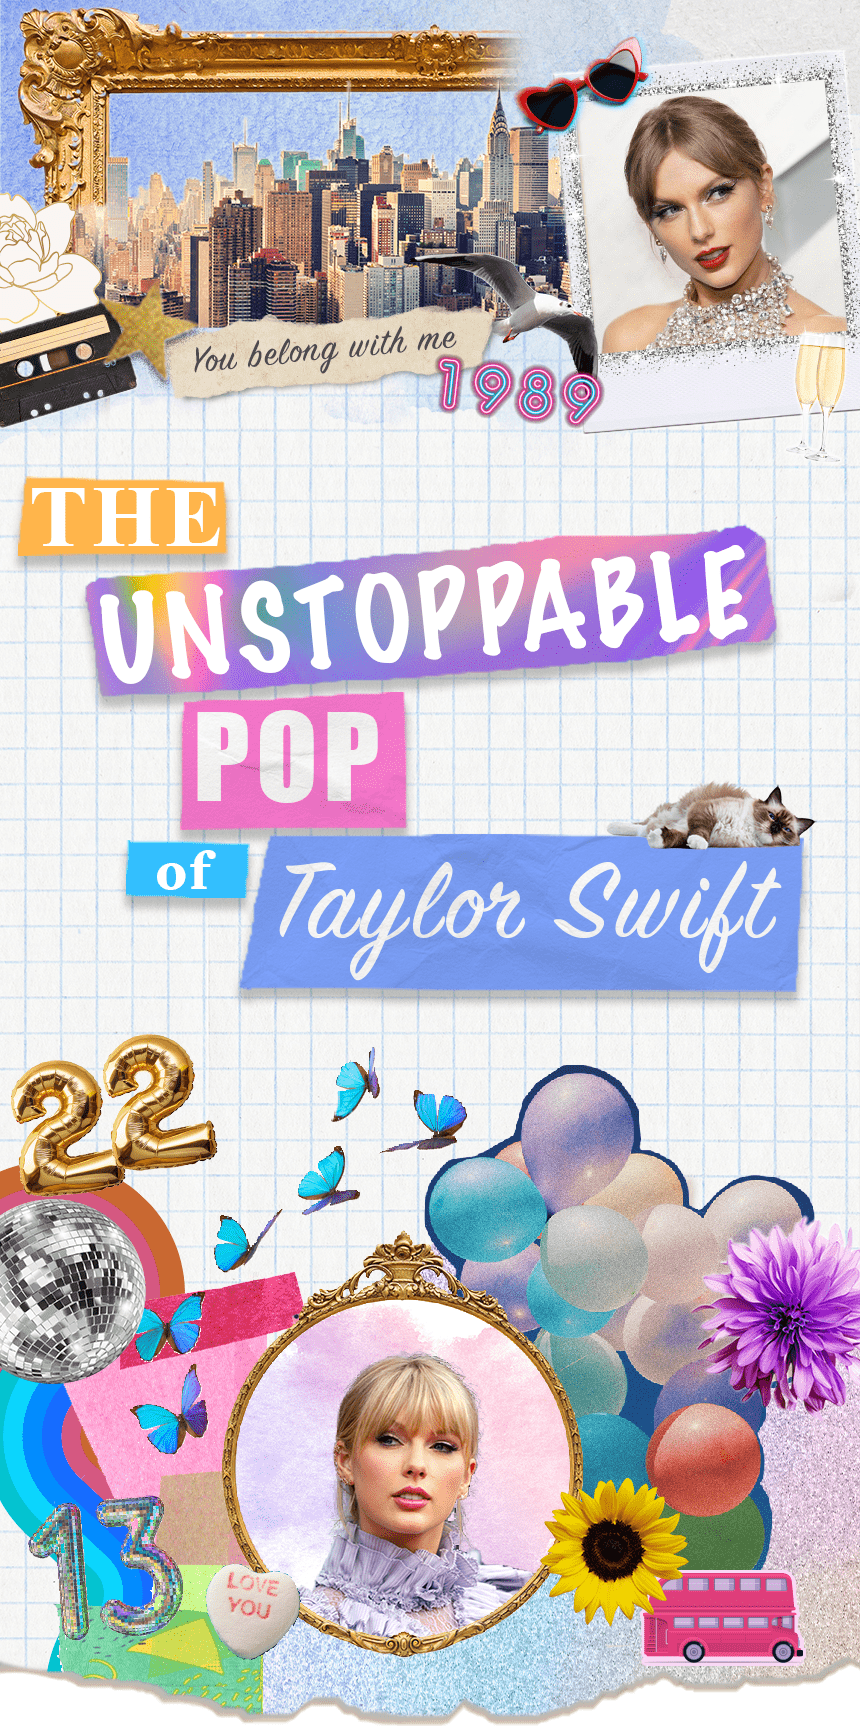 The unstoppable pop of Taylor Swift